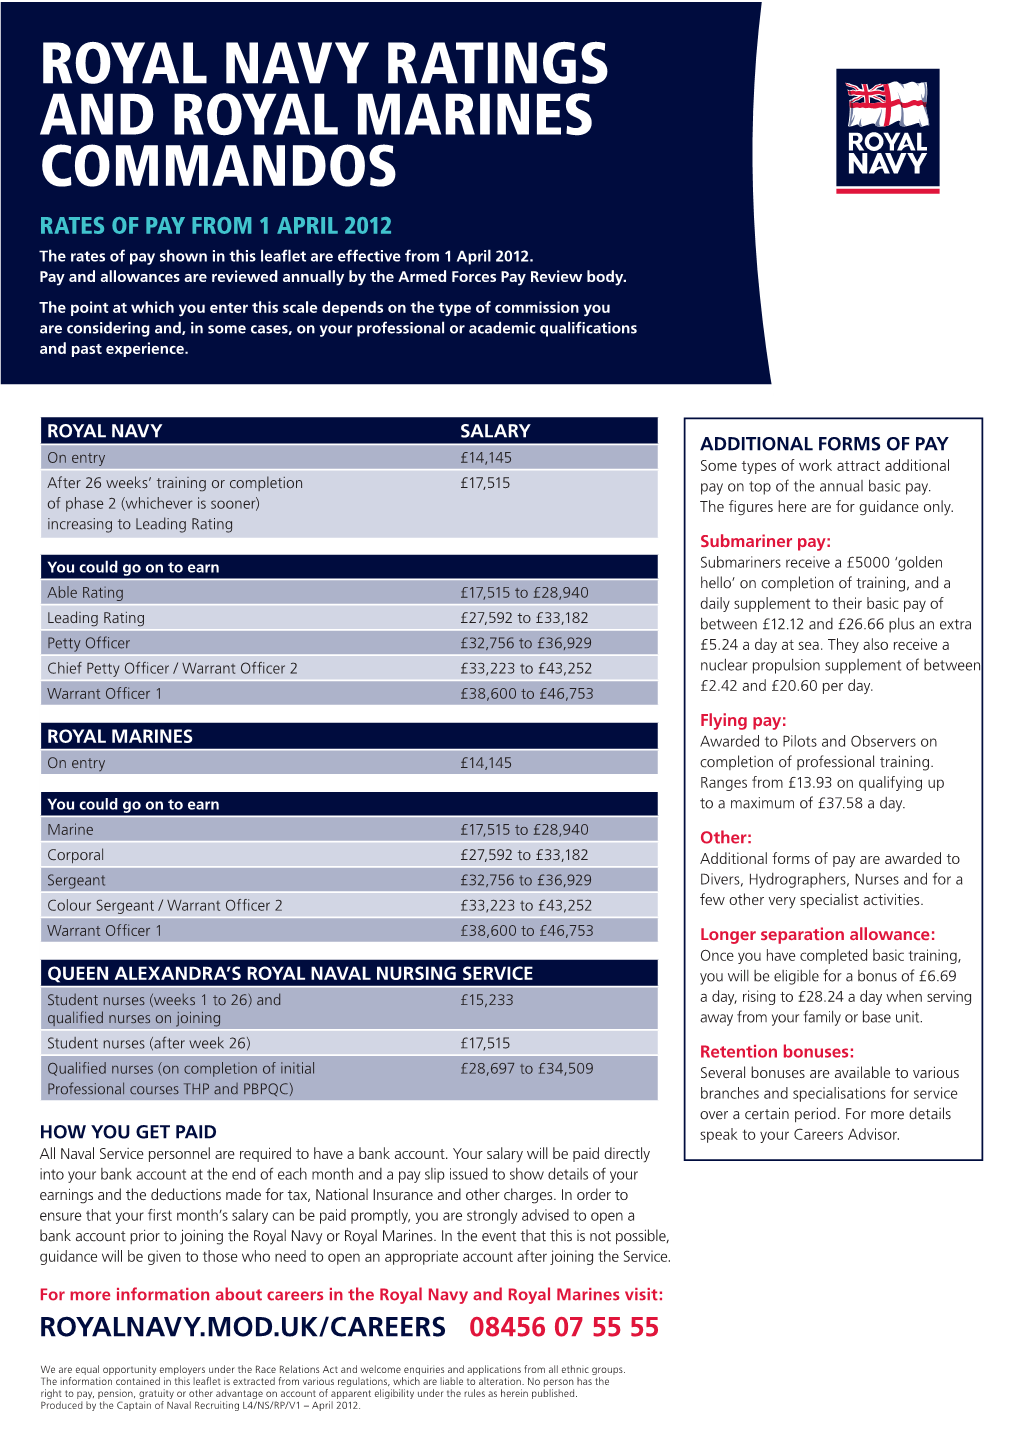 ROYAL NAVY RATINGS and ROYAL MARINES COMMANDOS RATES of PAY from 1 APRIL 2012 the Rates of Pay Shown in This Leaﬂet Are Effective from 1 April 2012